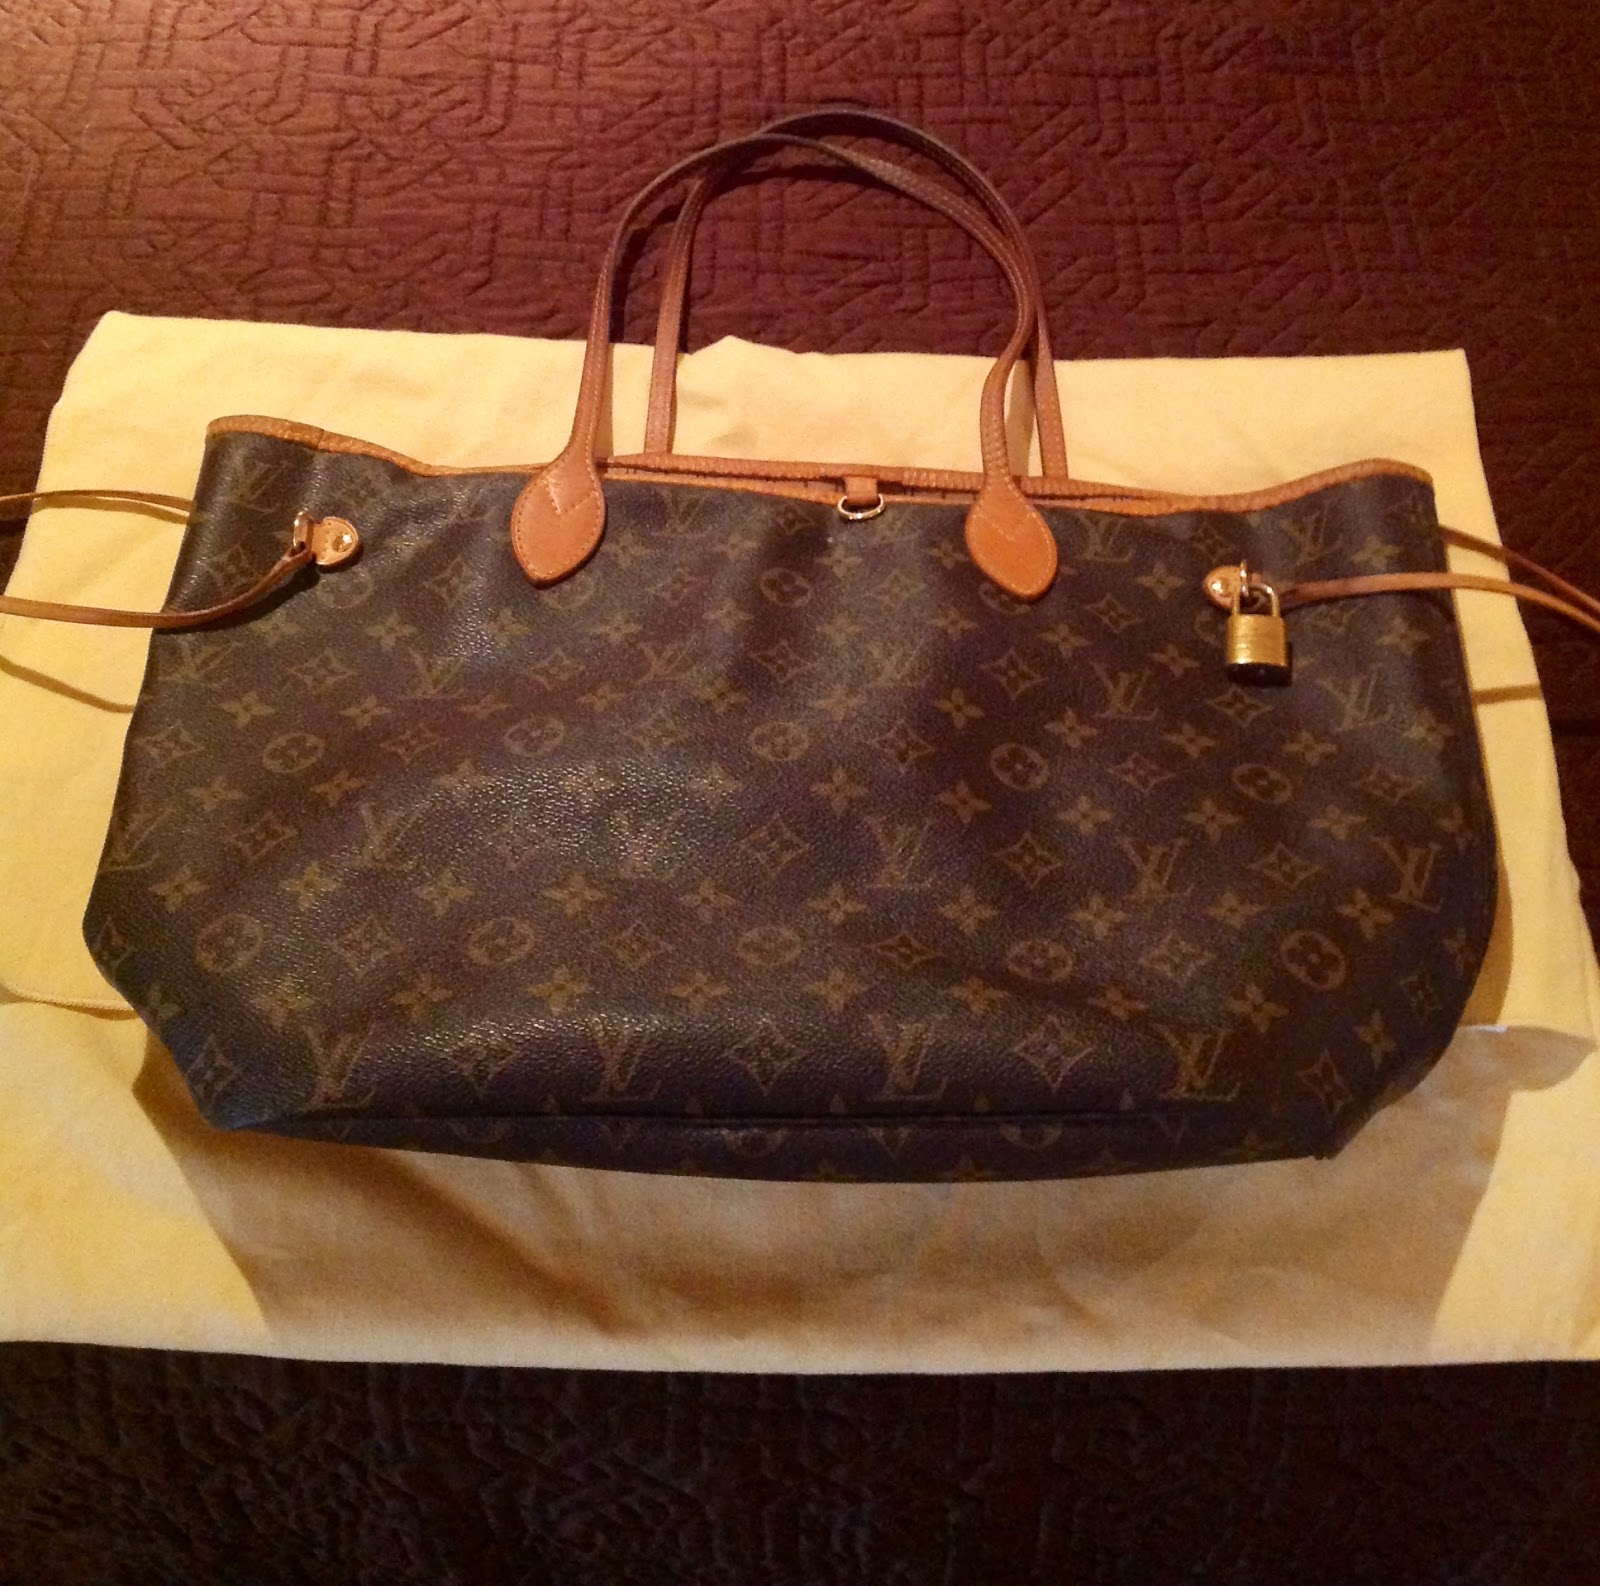 Why Quality Counts: A Lesson From a Louis Vuitton Tote | Gina Miller&#39;s Blog